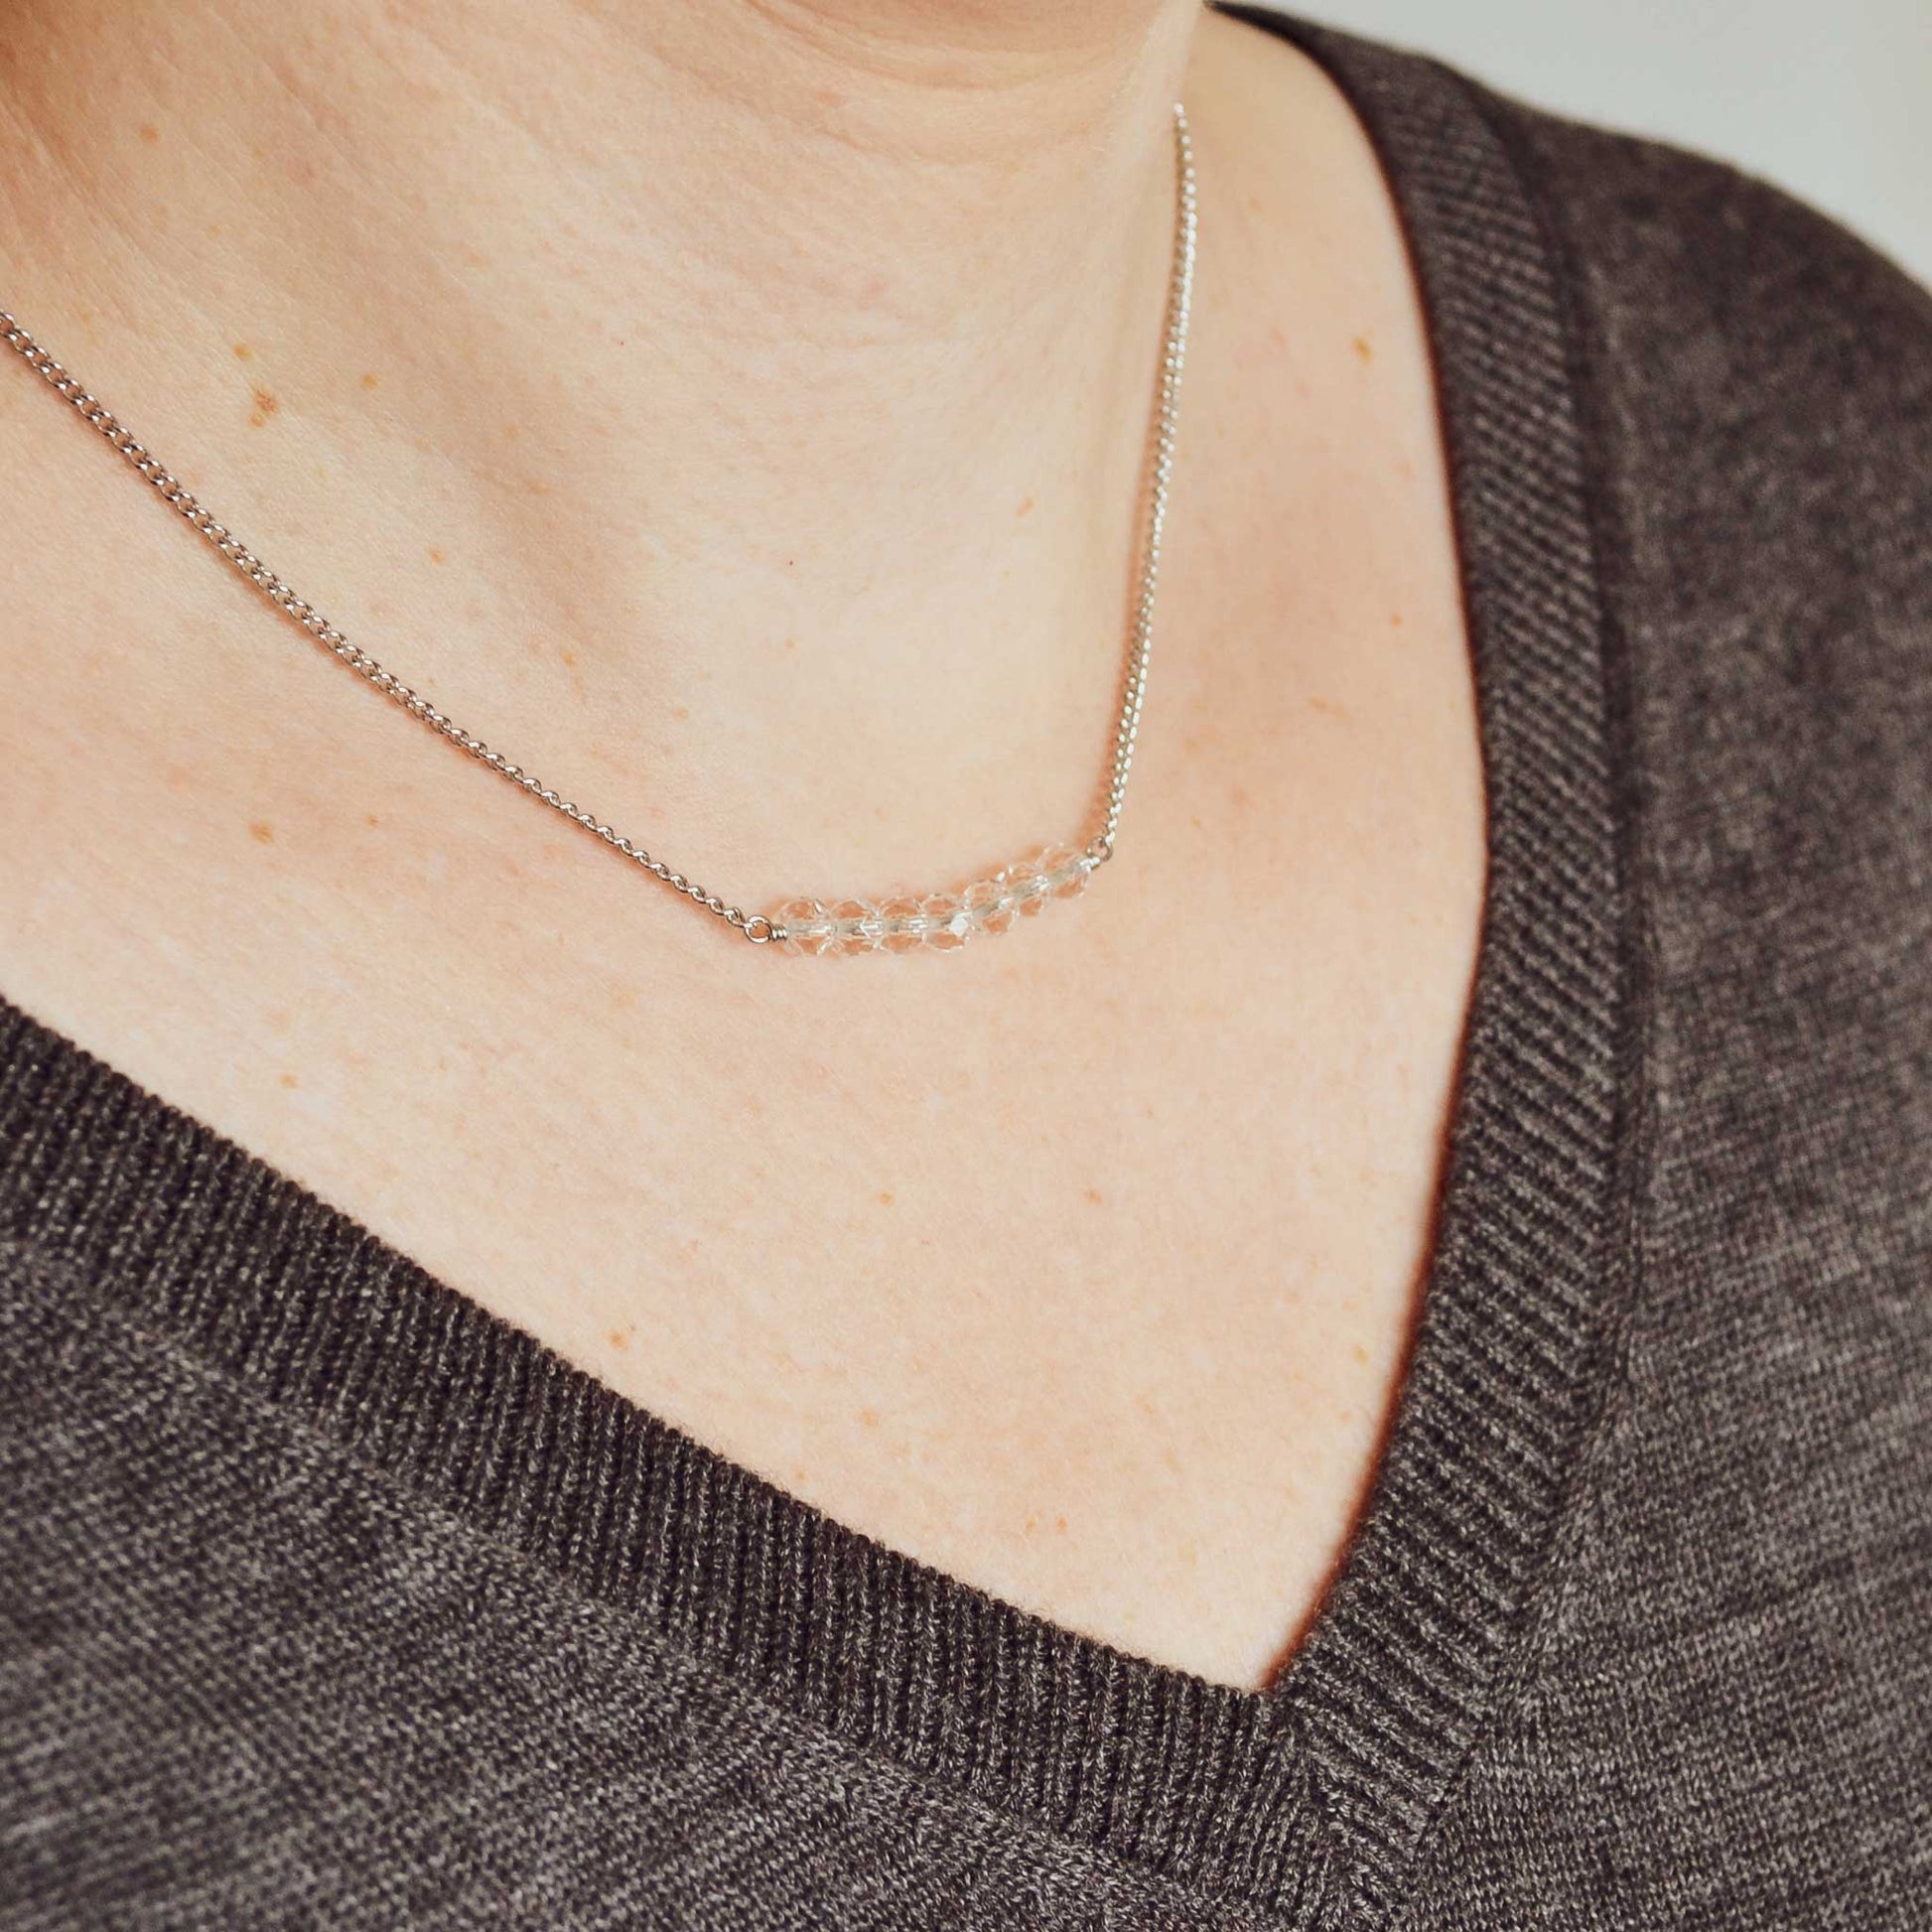 Woman wearing grey v neck jumper and dainty clear crystal necklace